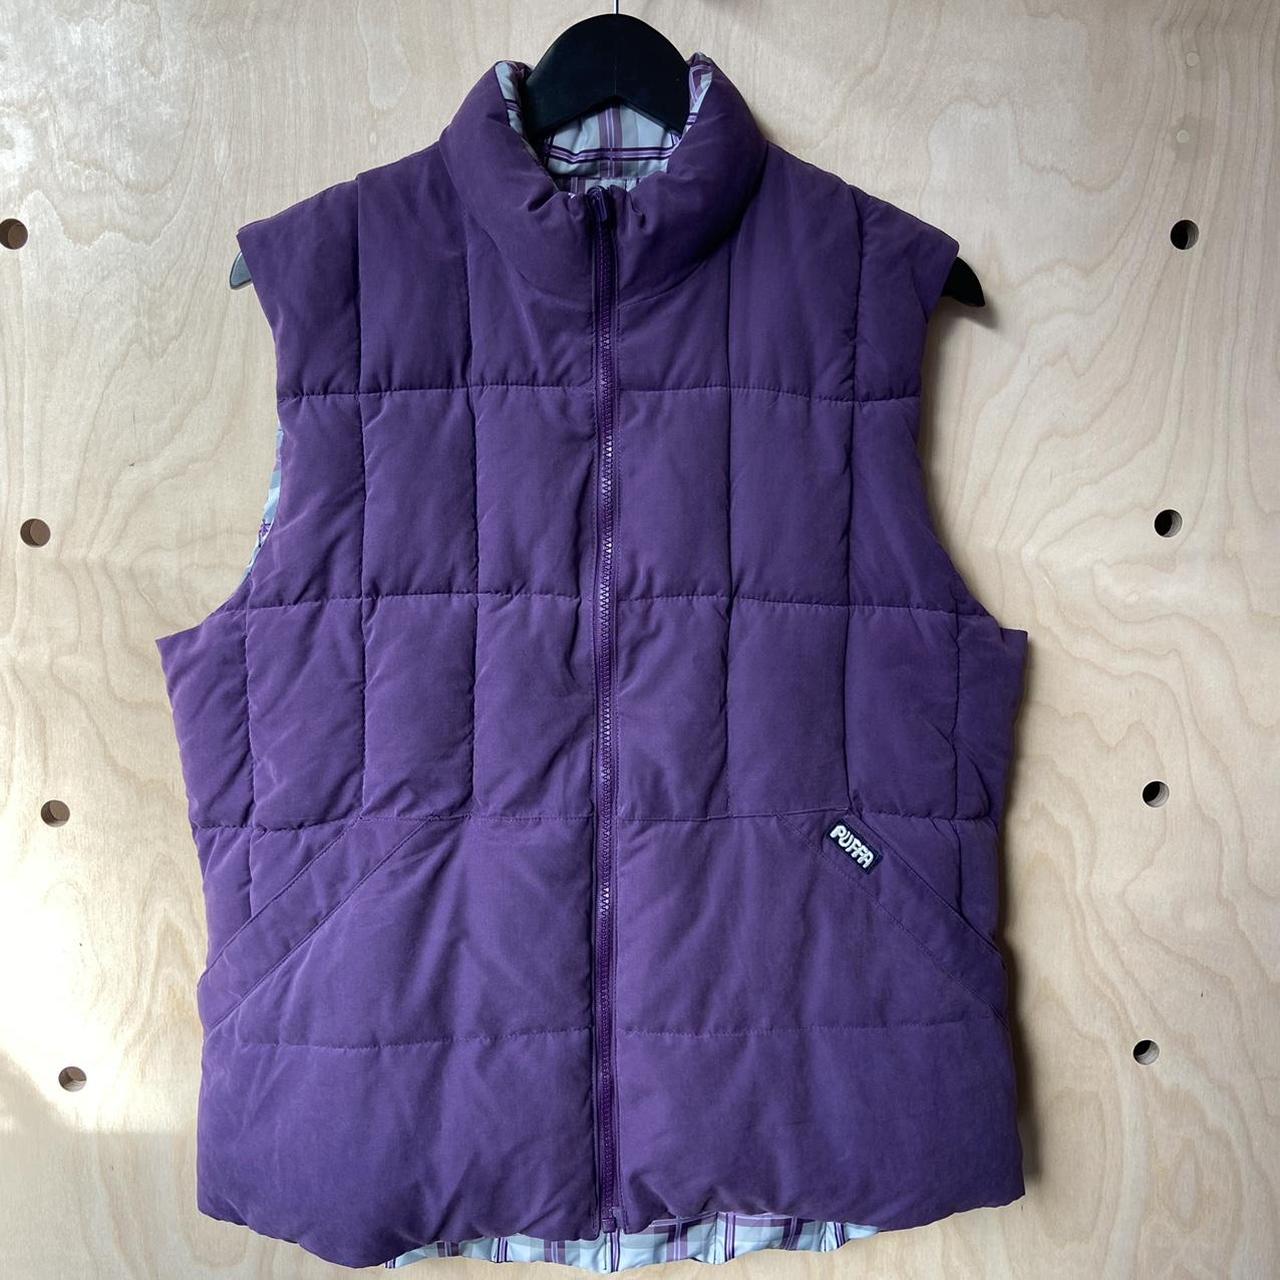 Vintage Puffa purple and purple and grey checked... - Depop